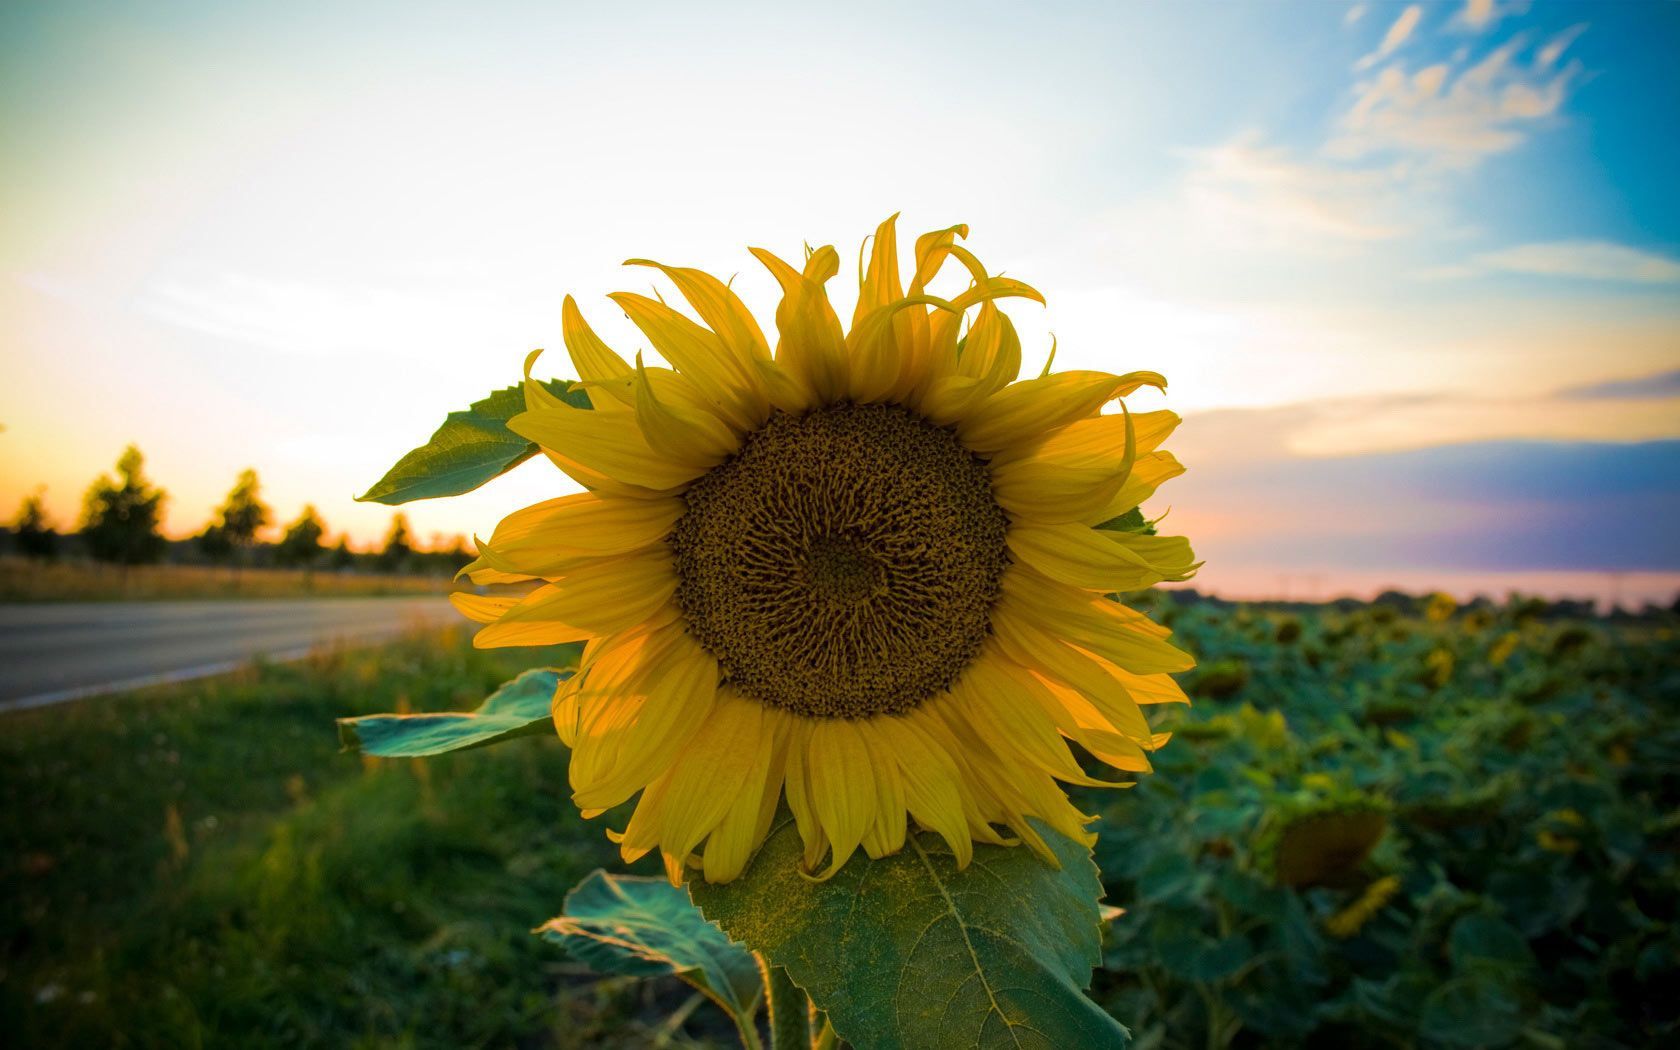 Top Widescreen Sunflower Wallpapers Images for Pinterest